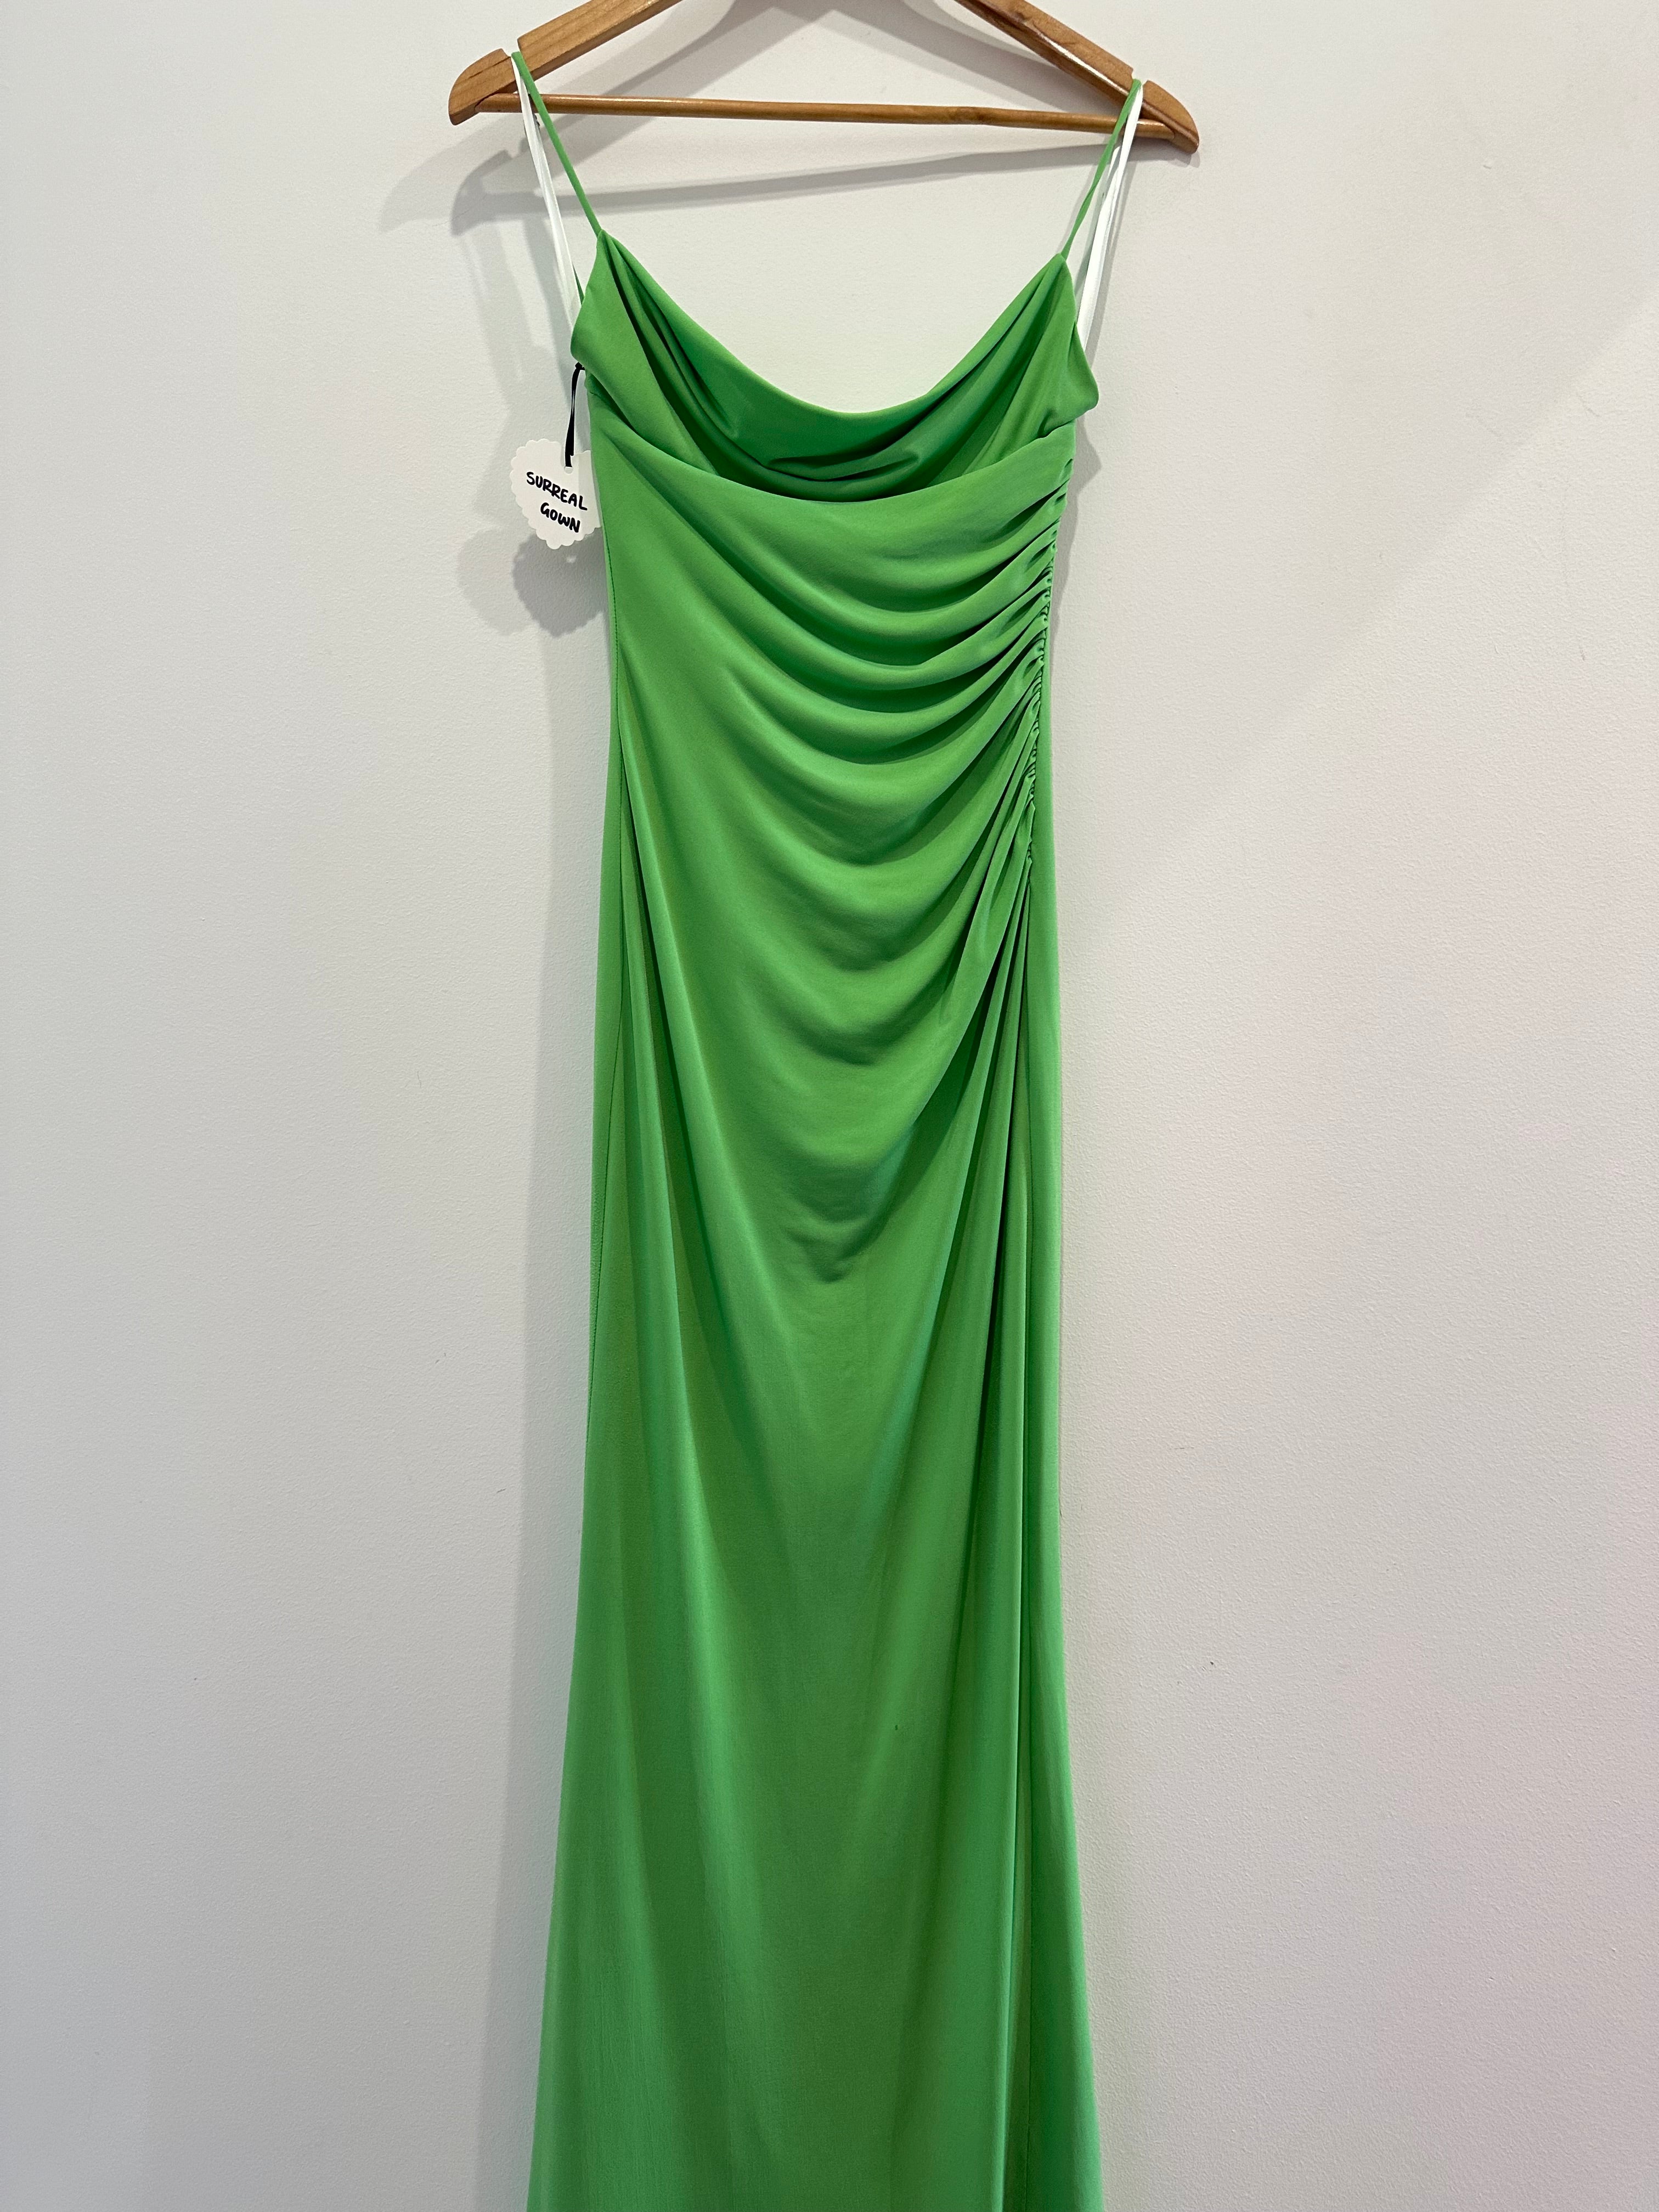 Surreal Gown Green - FOR SALE